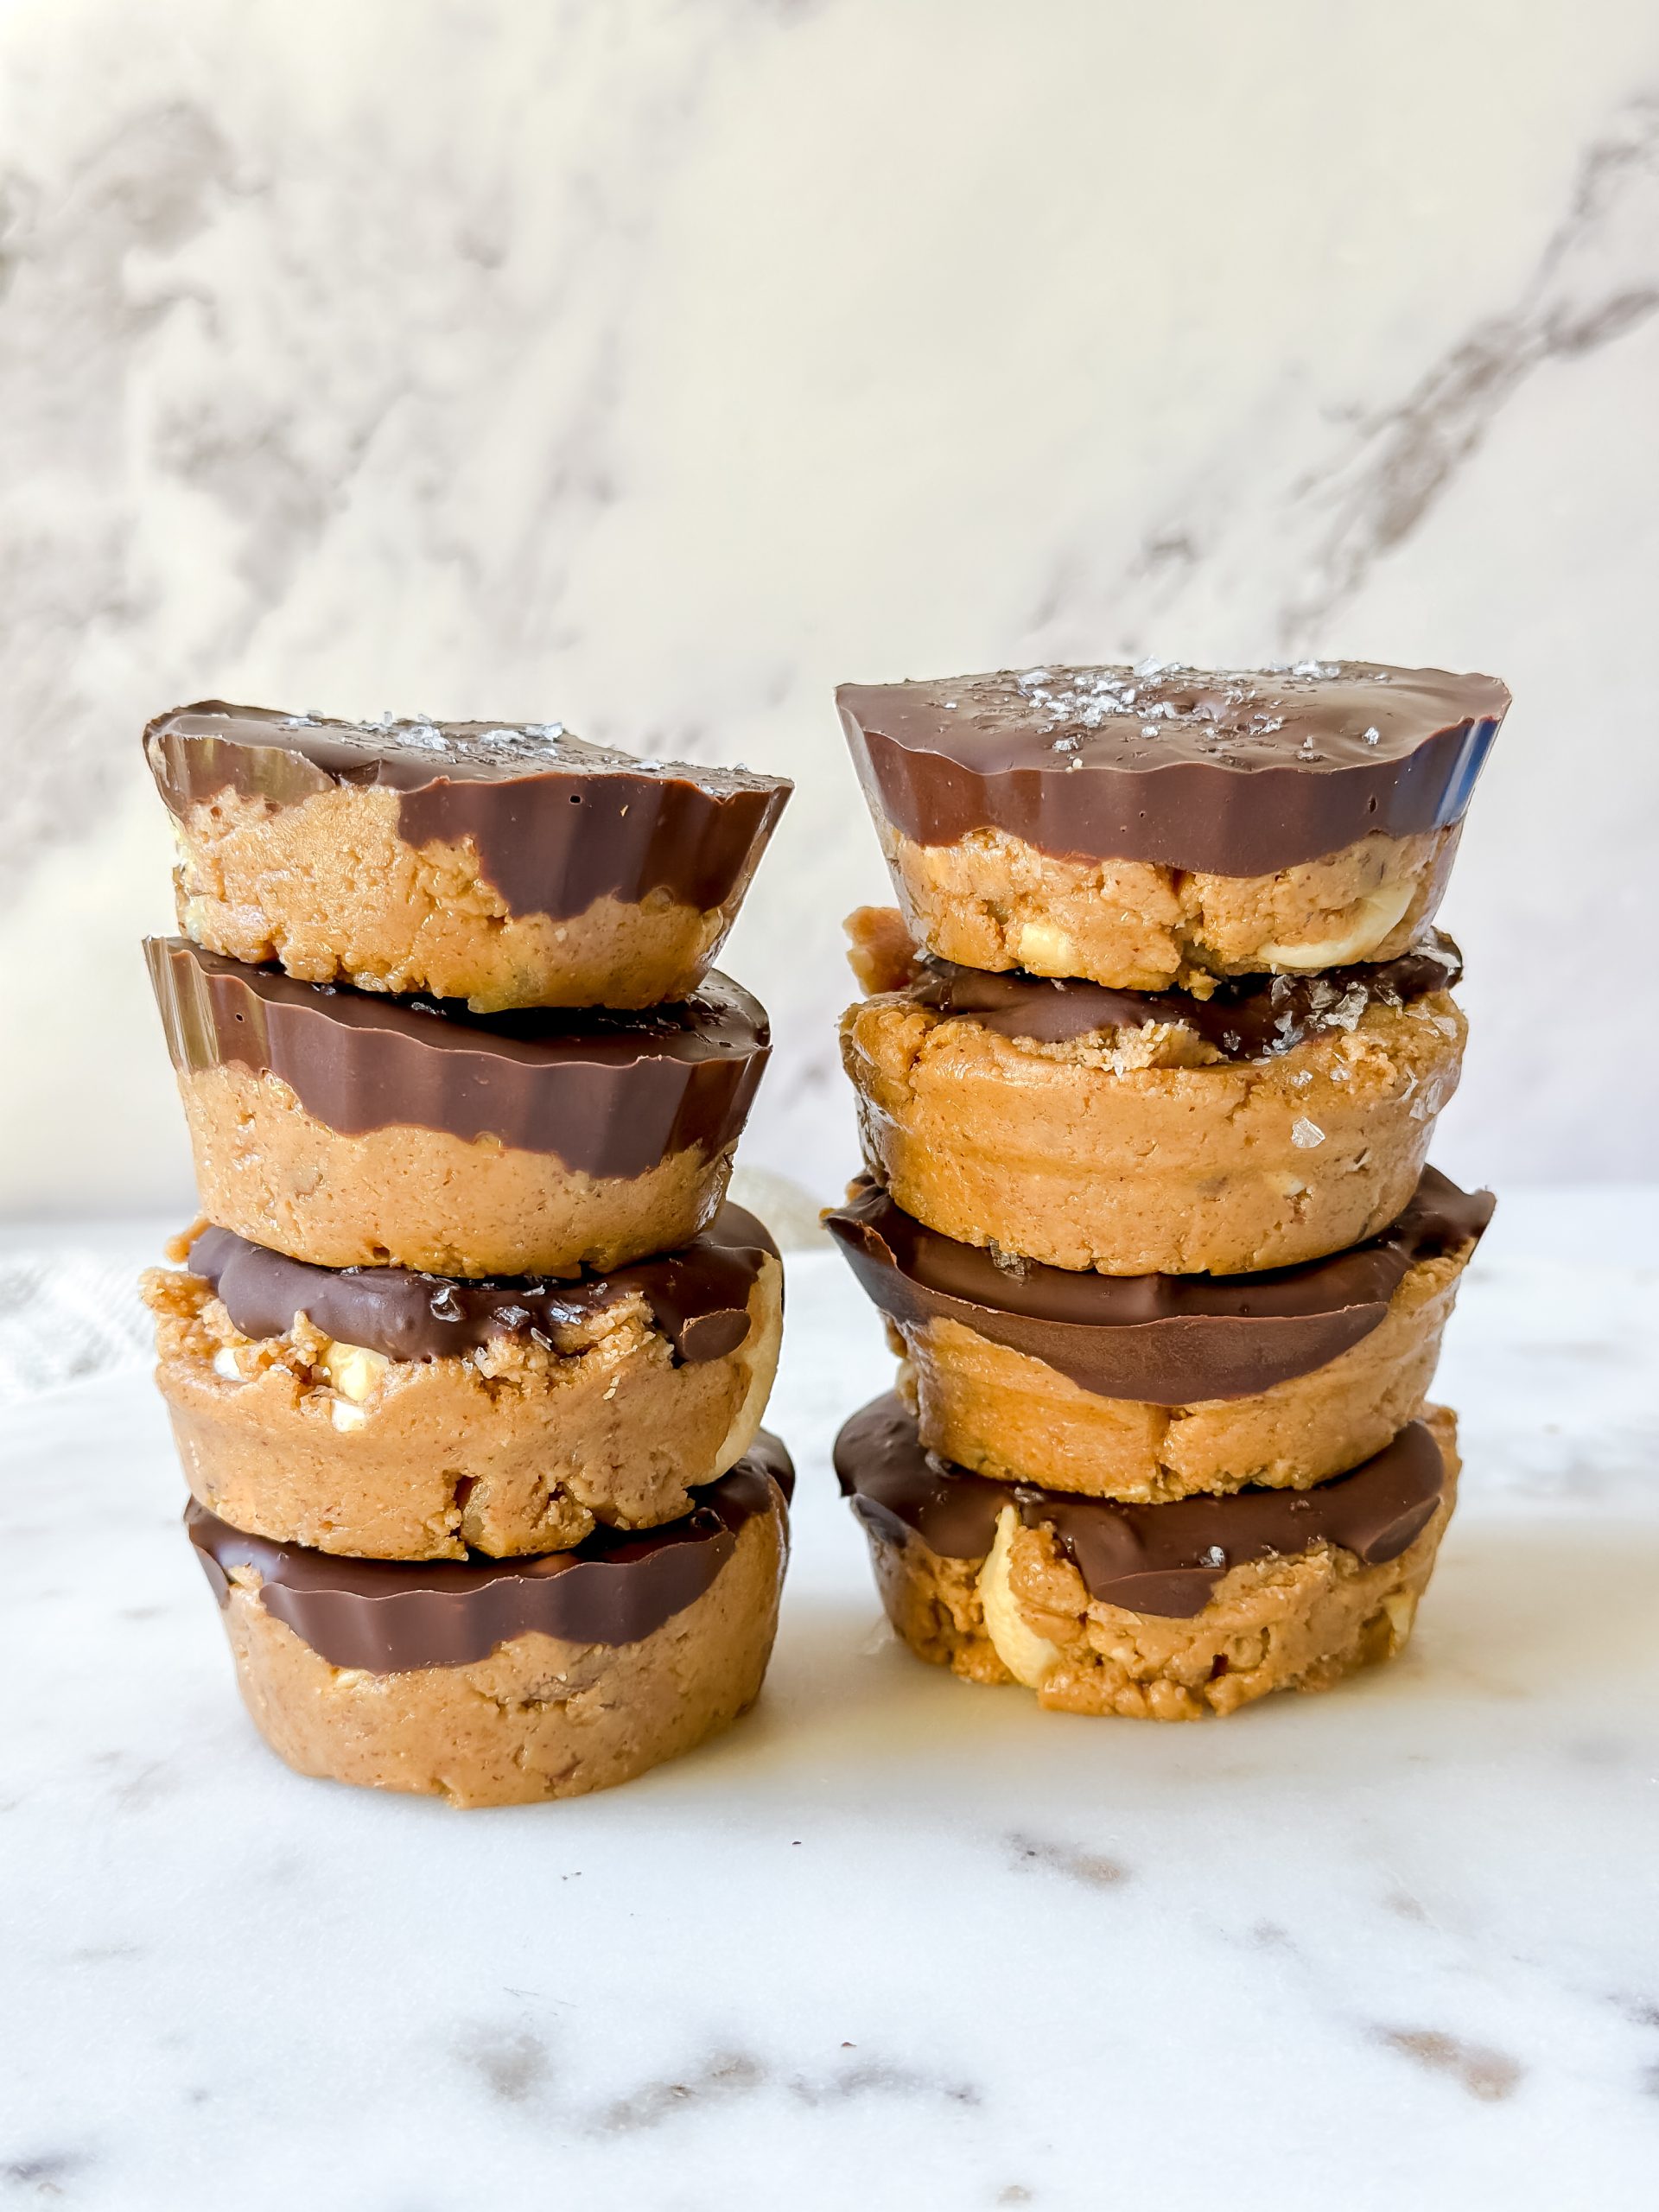 2 stacks of peanut butter cups